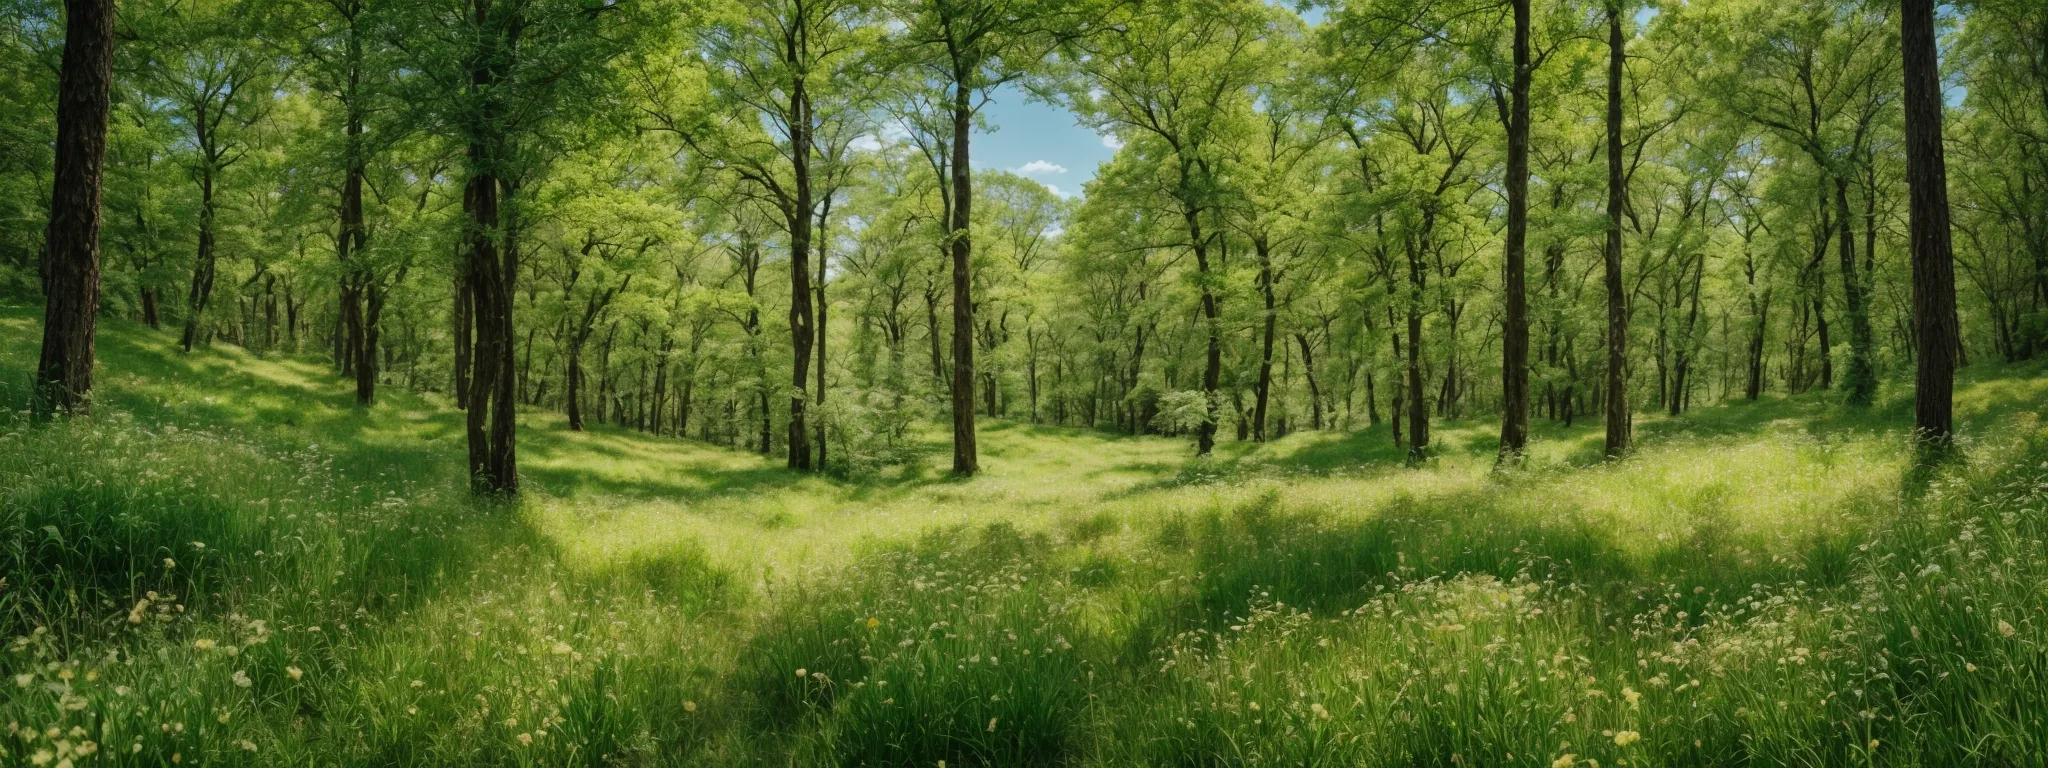 a panoramic view of a lush green forest transitioning into a vibrant, flowering meadow under a clear blue sky.